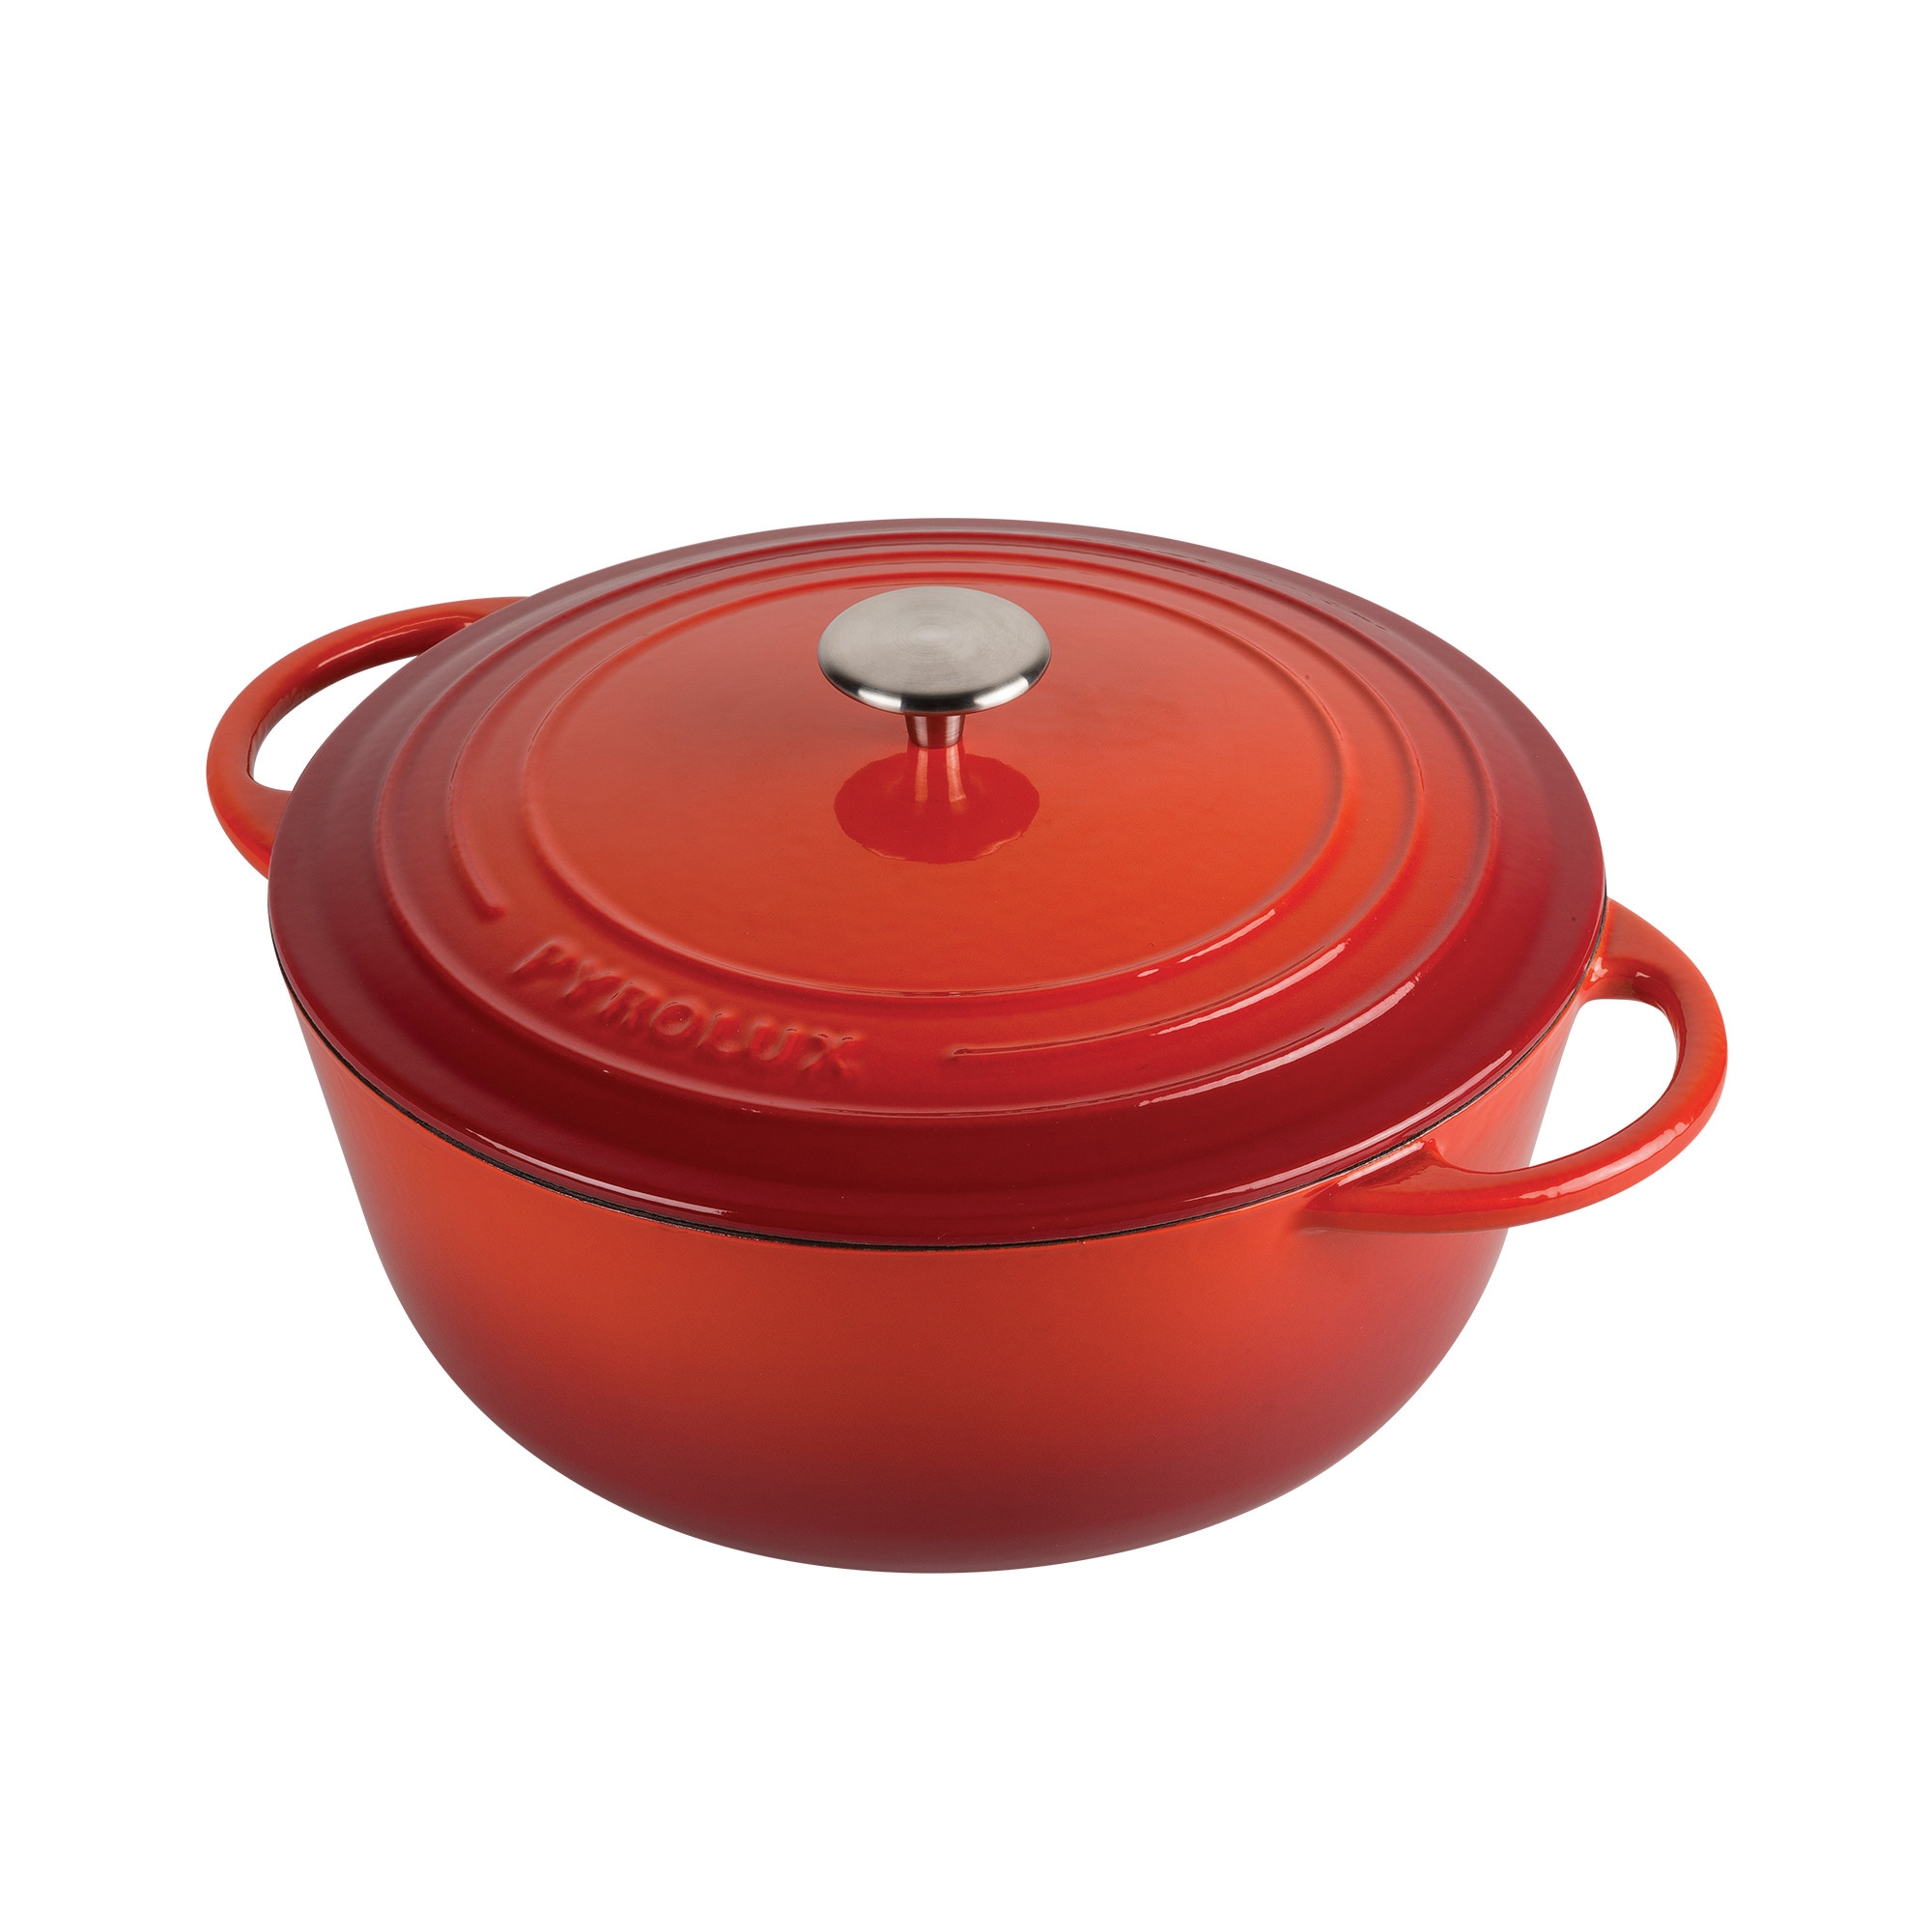 Pyrolux Pyrochef Enamelled Cast Iron Casserole 28cm - 6L Red Image 1